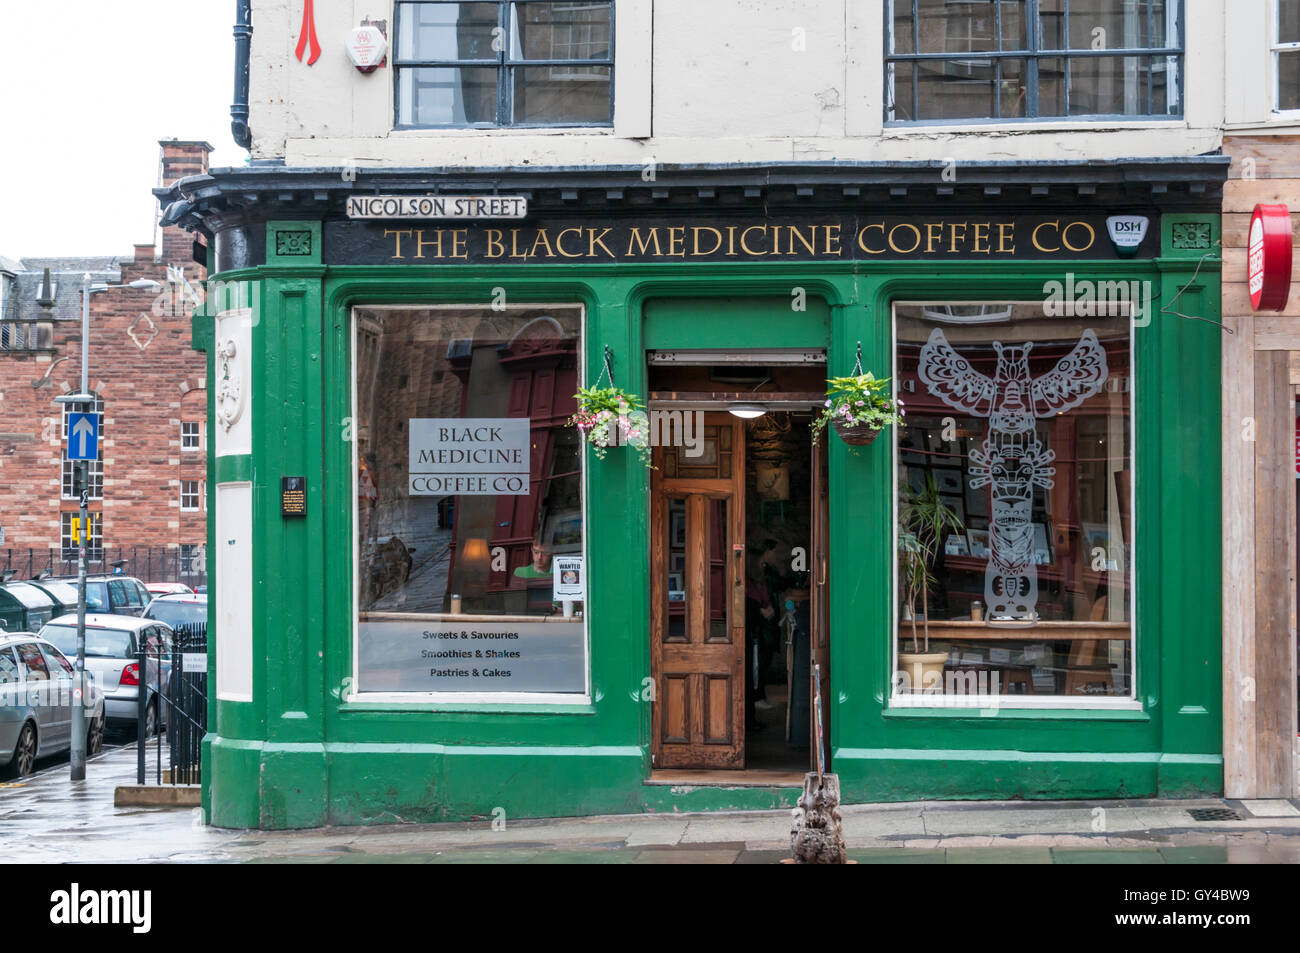 The Black Medicine Coffee Co in Nicolson Street, Edinburgh.  Where J K Rowling wrote some early parts of the Harry Potter books. Stock Photo